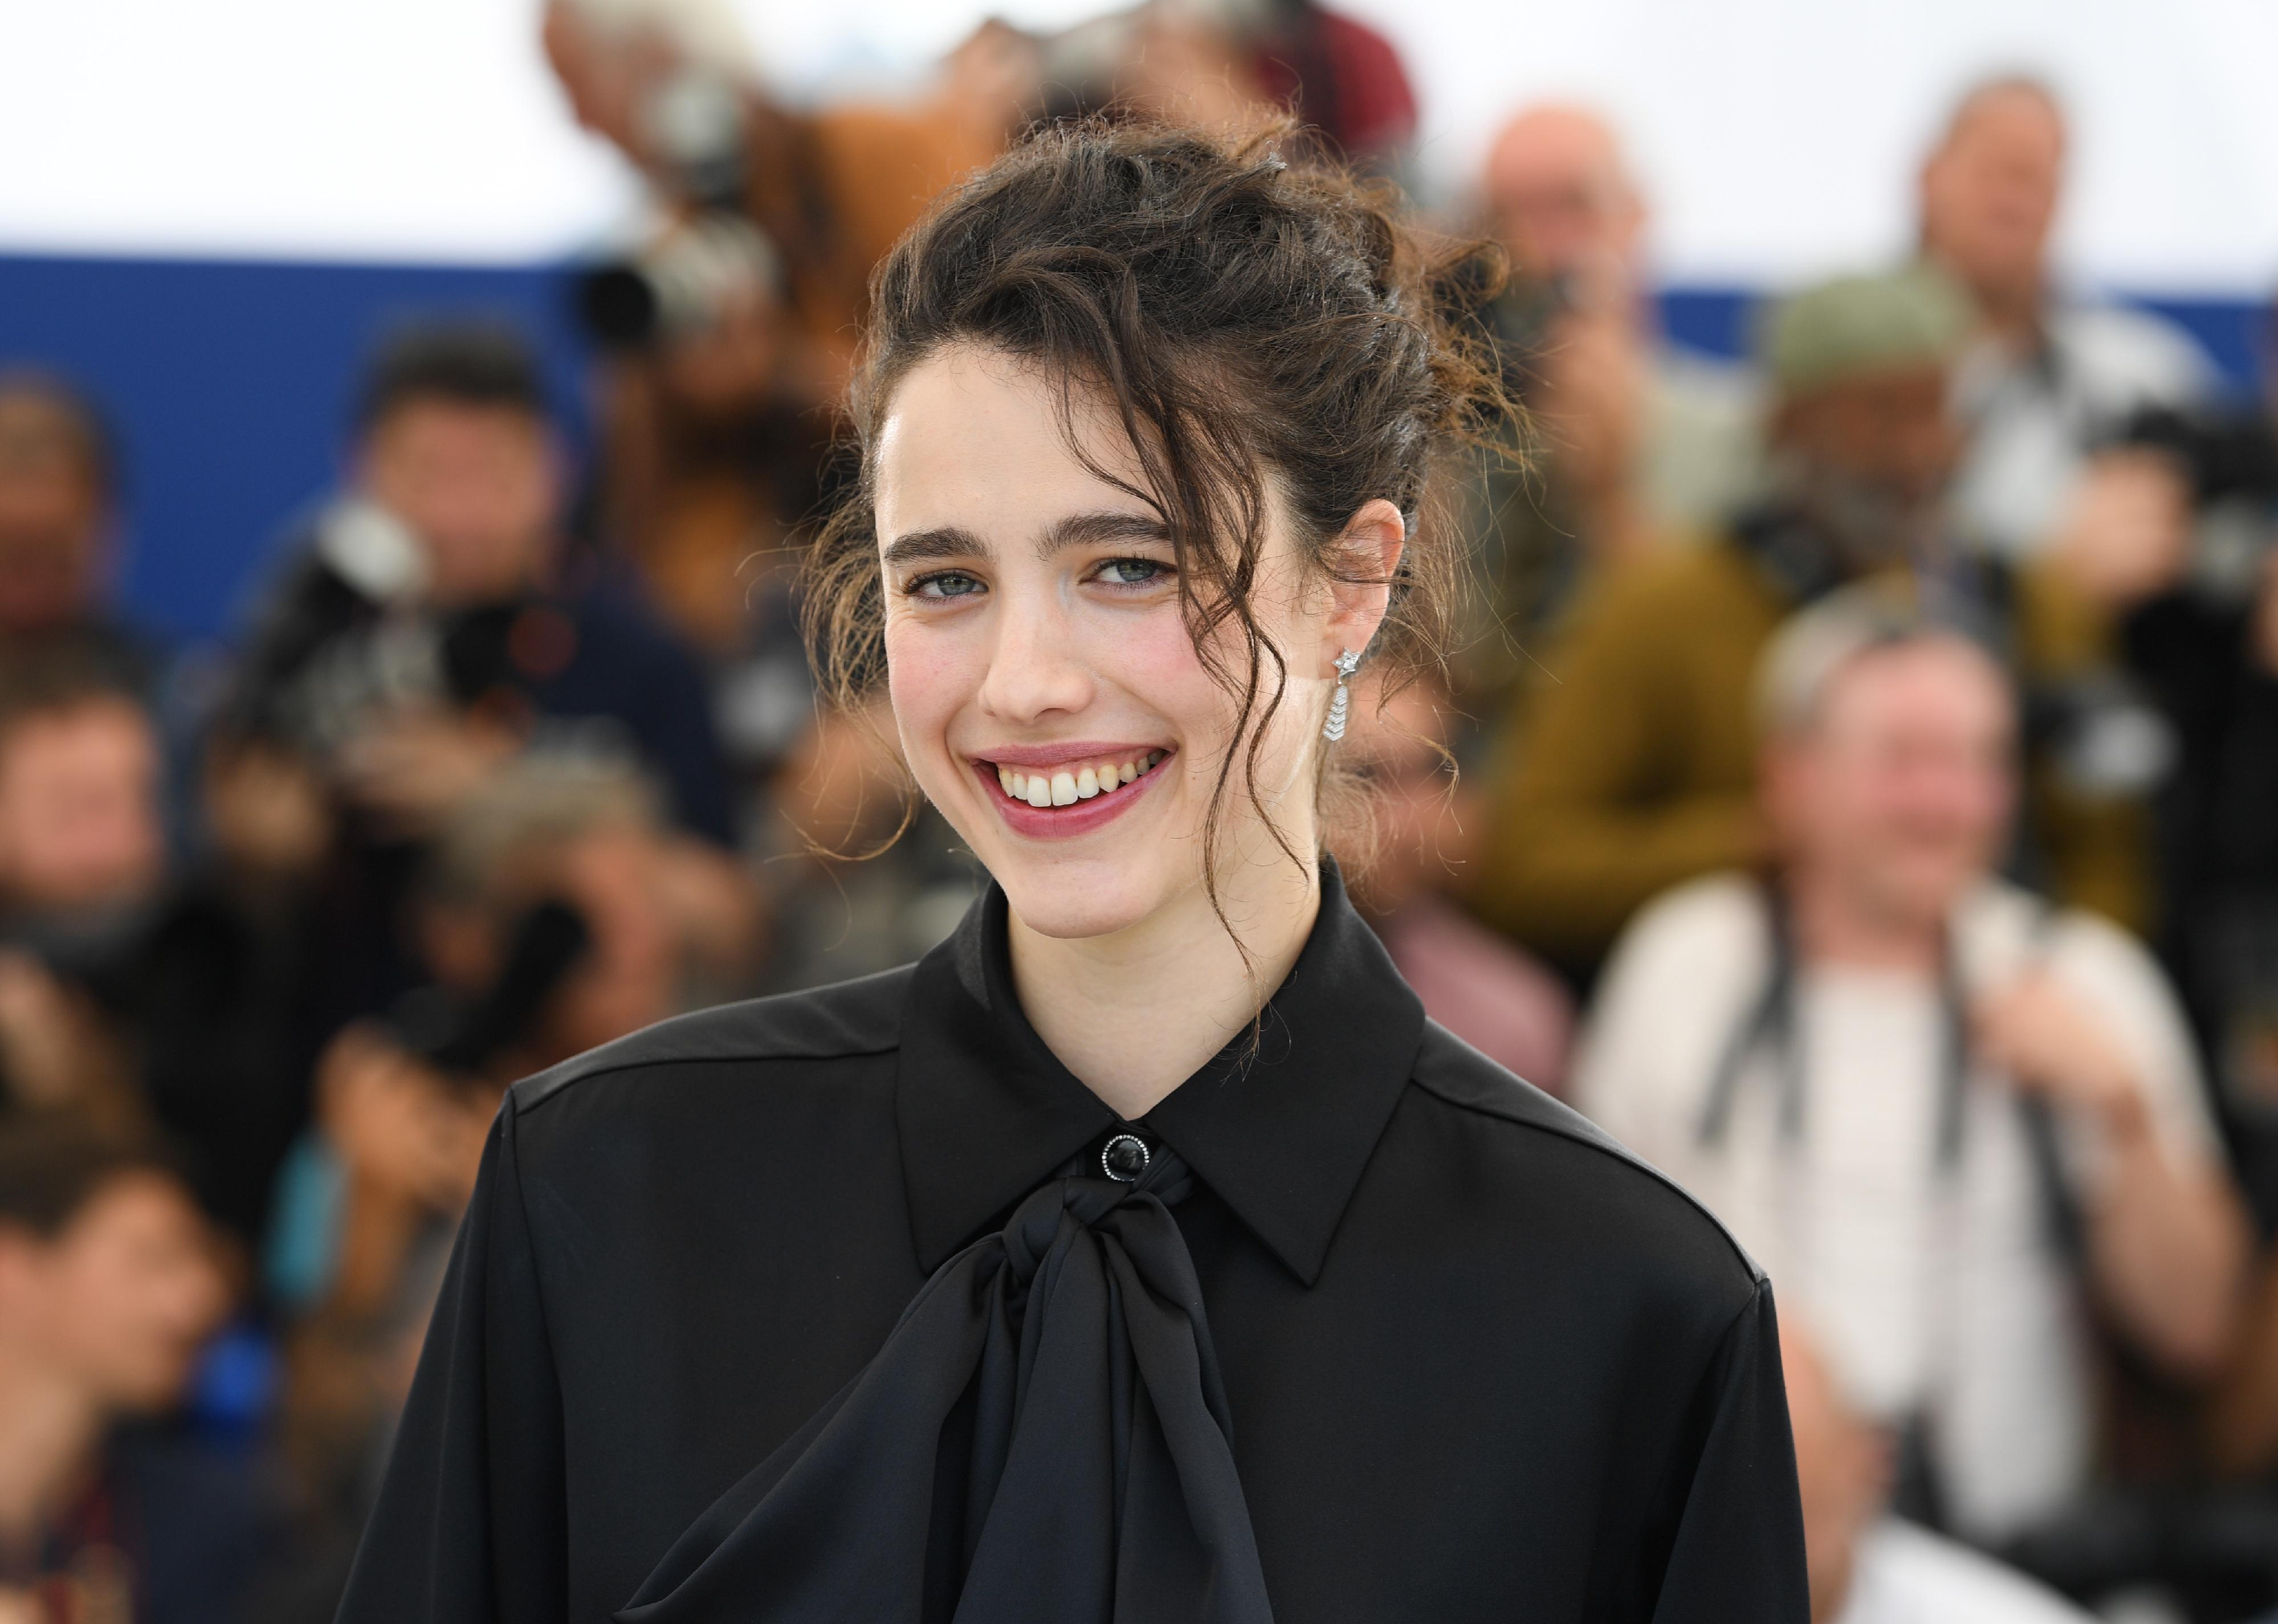 Margaret Qualley attends the photocall for "Stars At Noon".